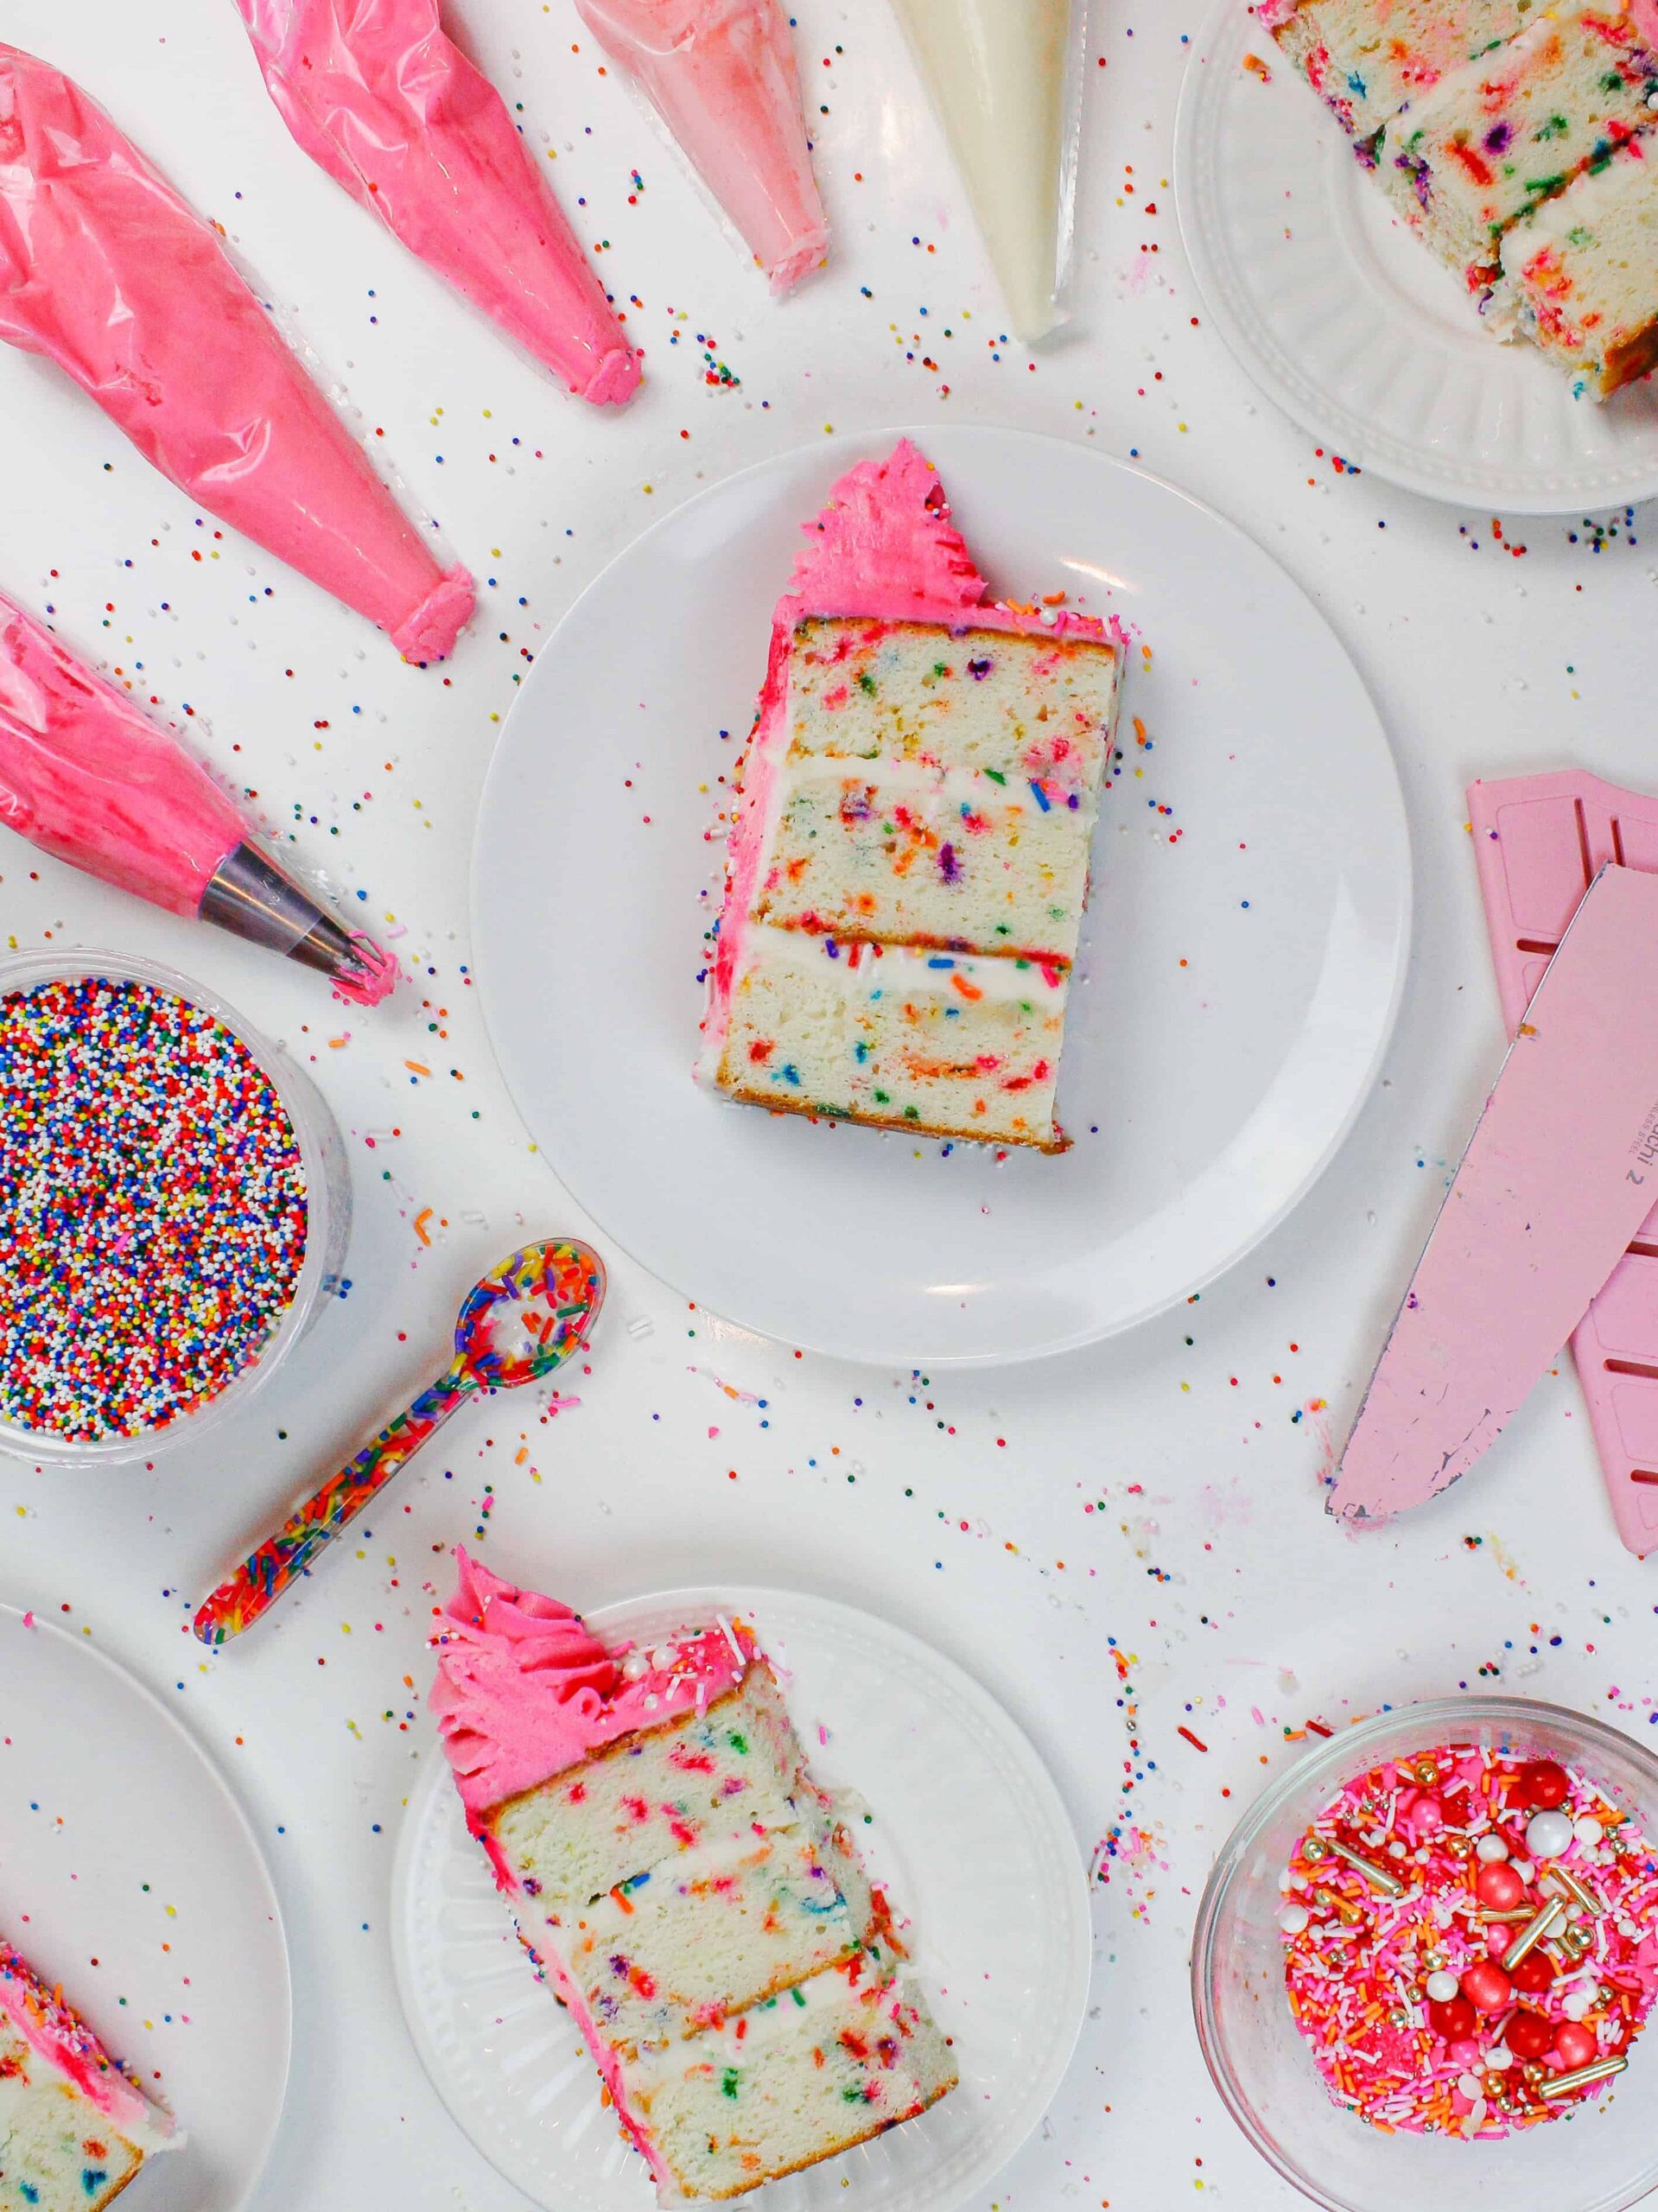 image of funfetti cake slices, cut and surrounded by pink frosting and rainbow sprinkles